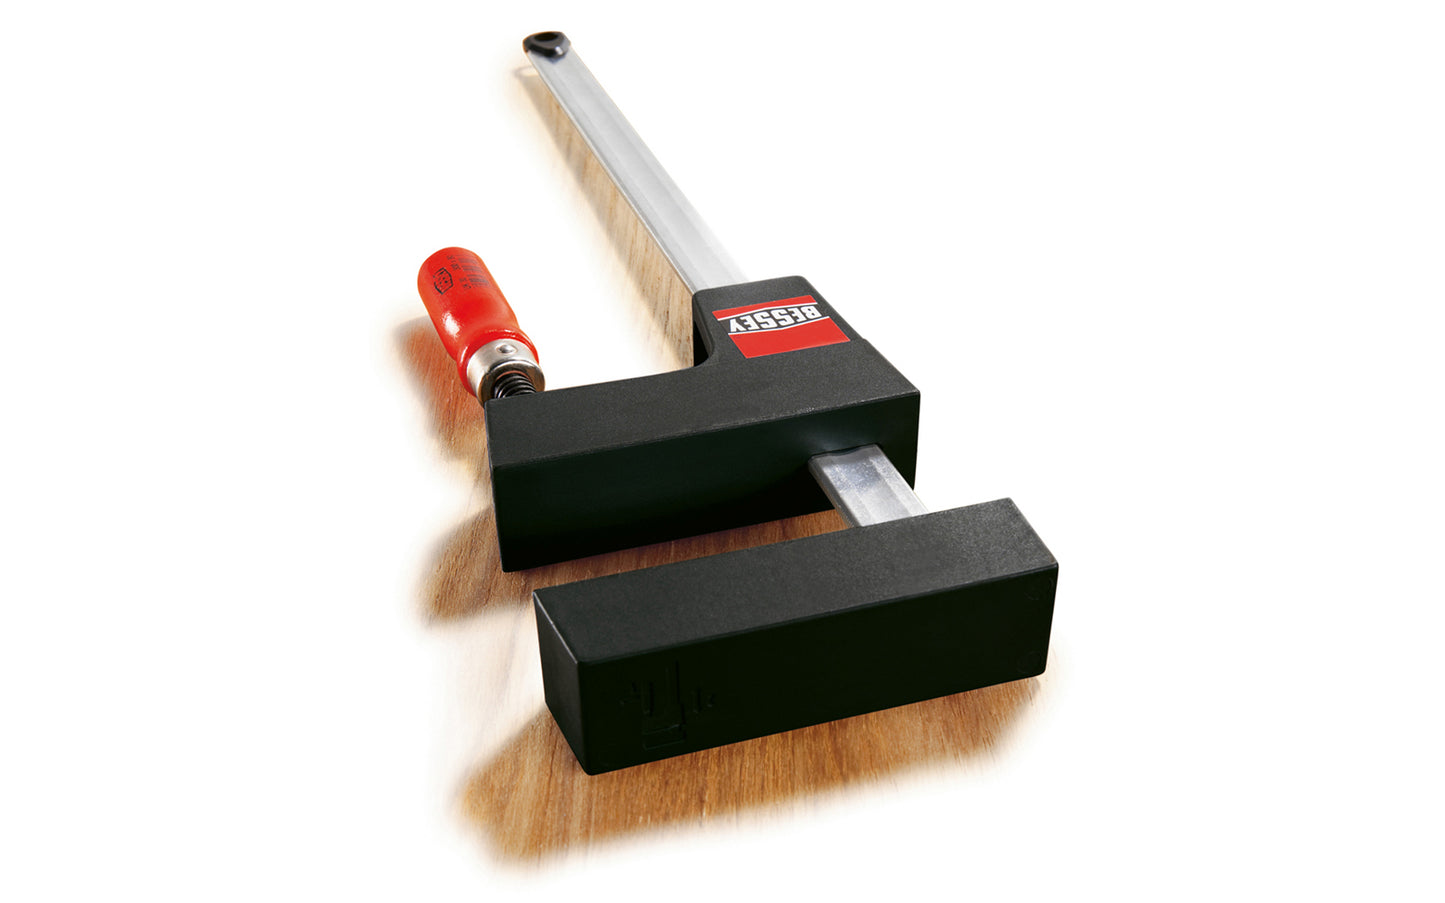 Bessey "UniKlamp" is a light duty universal clamp/spreader for bench top projects with a lighter frame & rail. Gentle touch jaws distribute the clamping pressure along the entire length of the rail & are ideal for sensitive work pieces & right angles. 24" max opening - 3-1/8" throat depth - Model UK3.024 - Wood handles - 091162006719